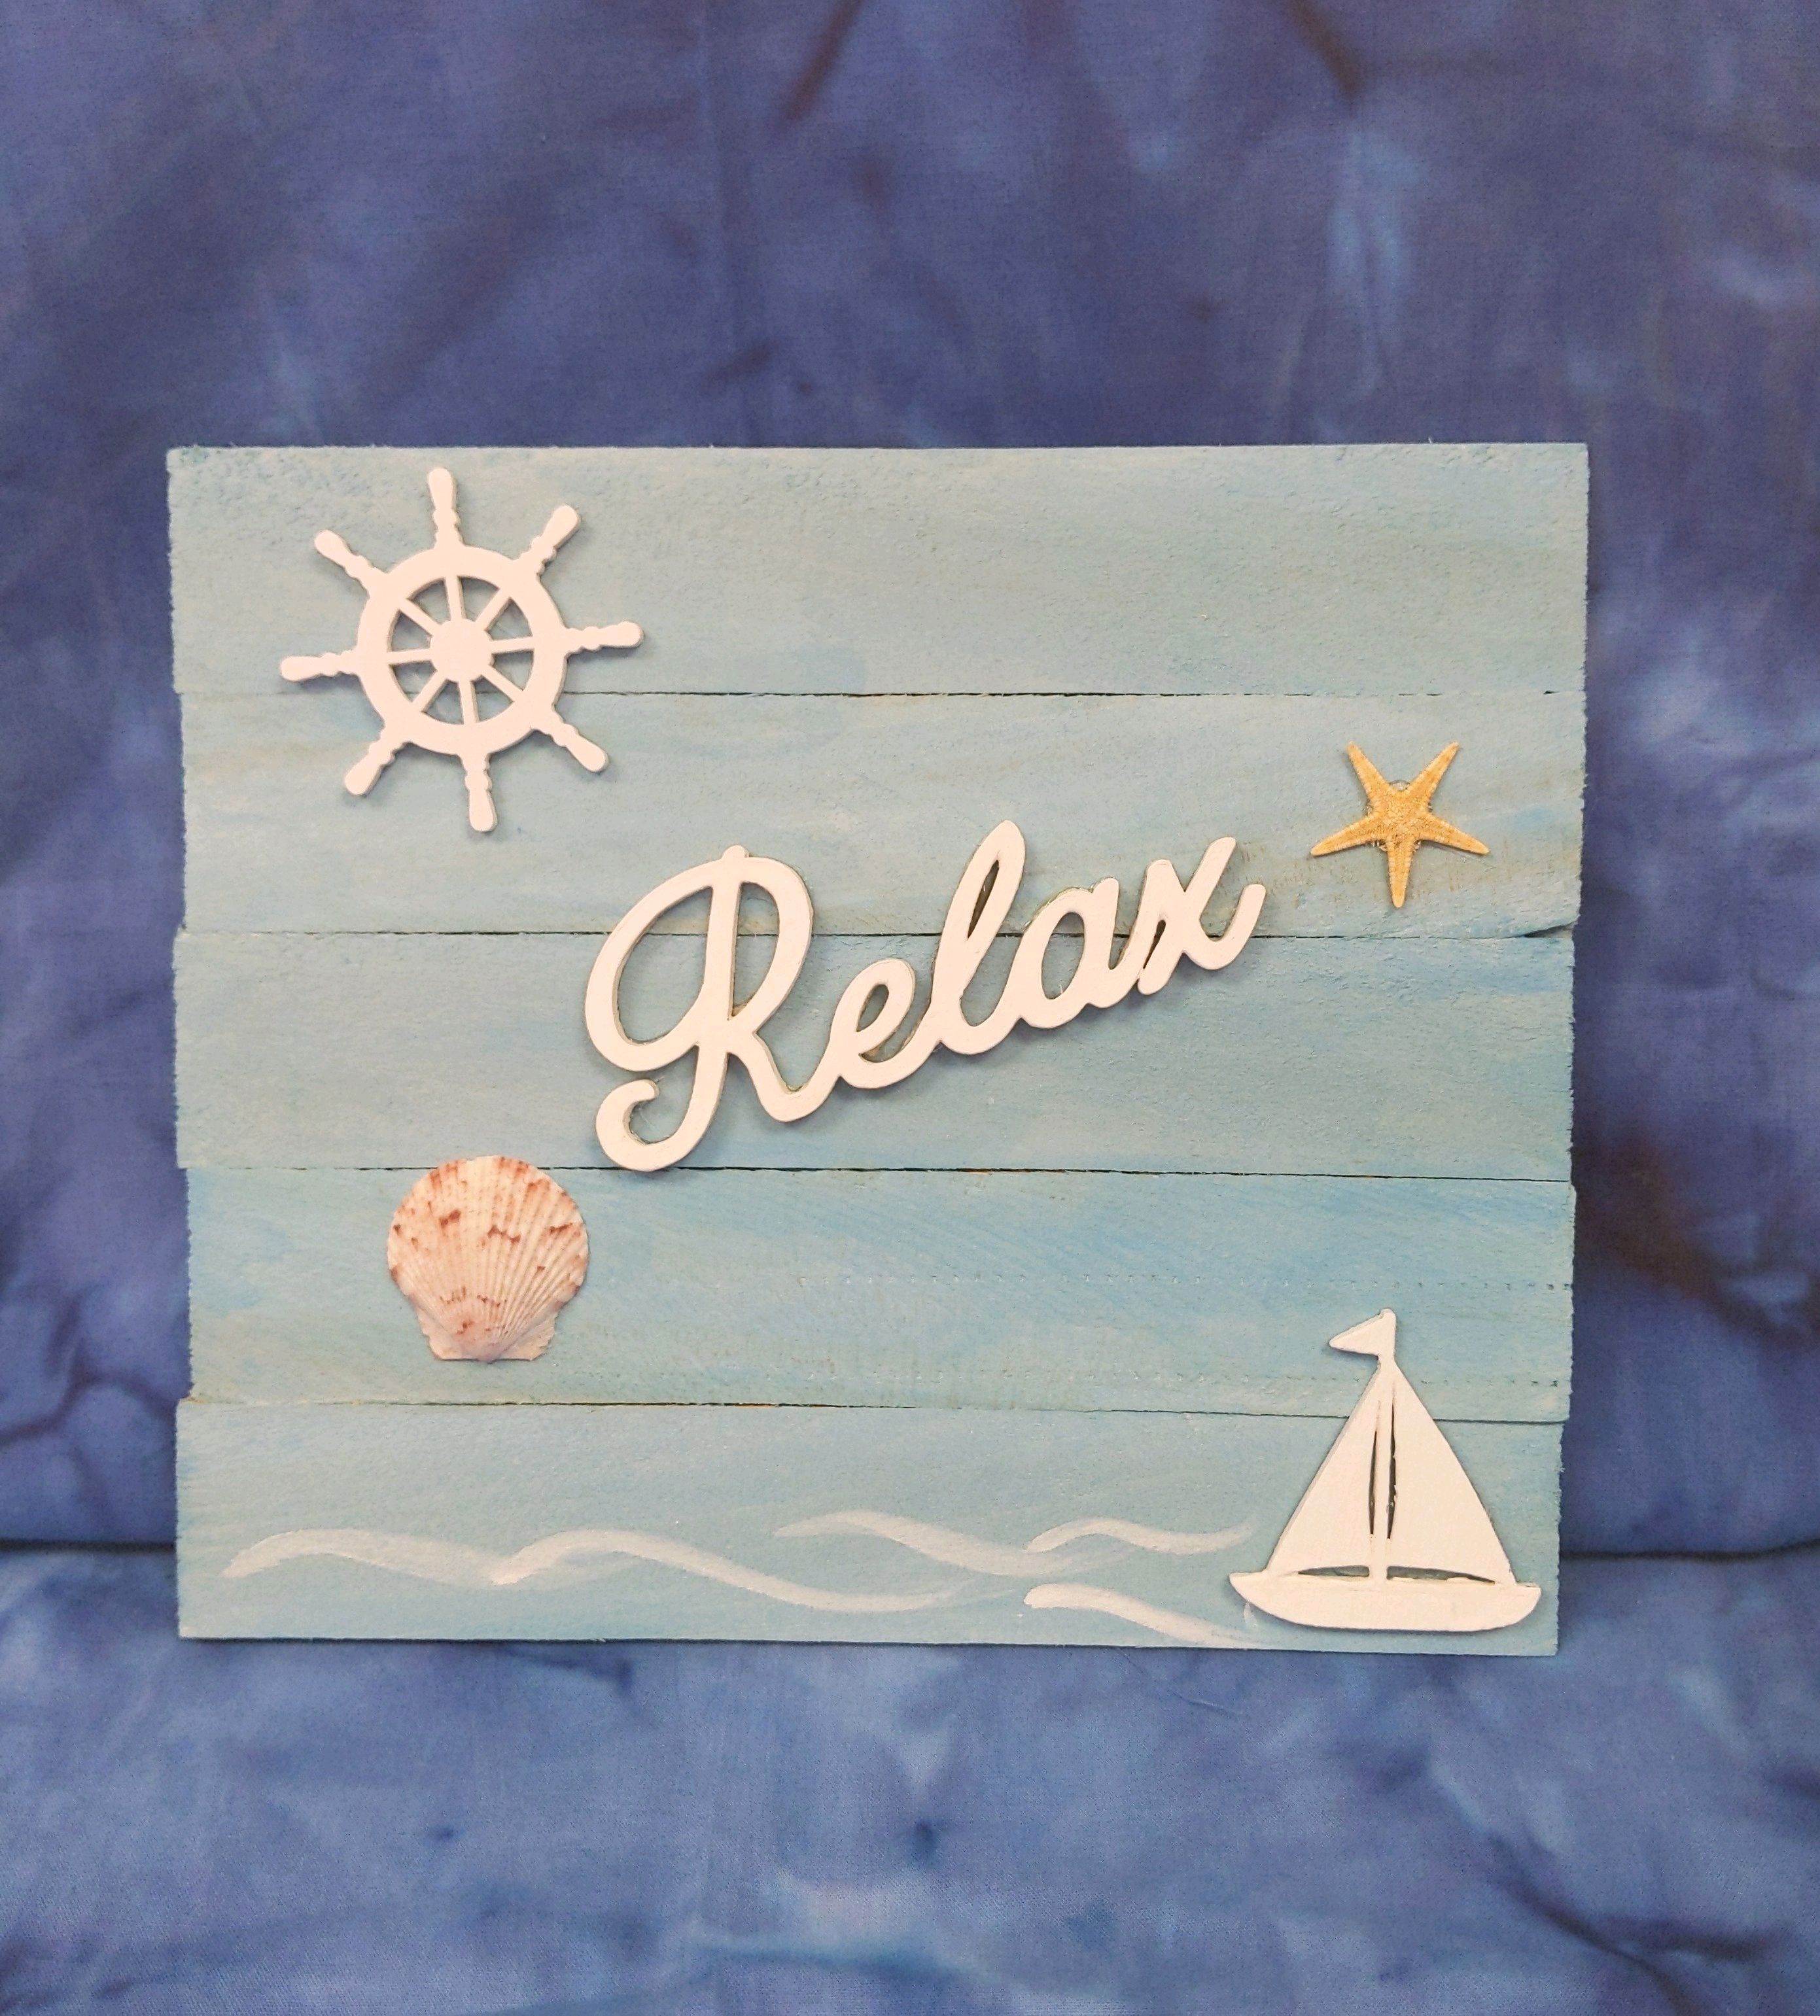 Relax Wall Sign